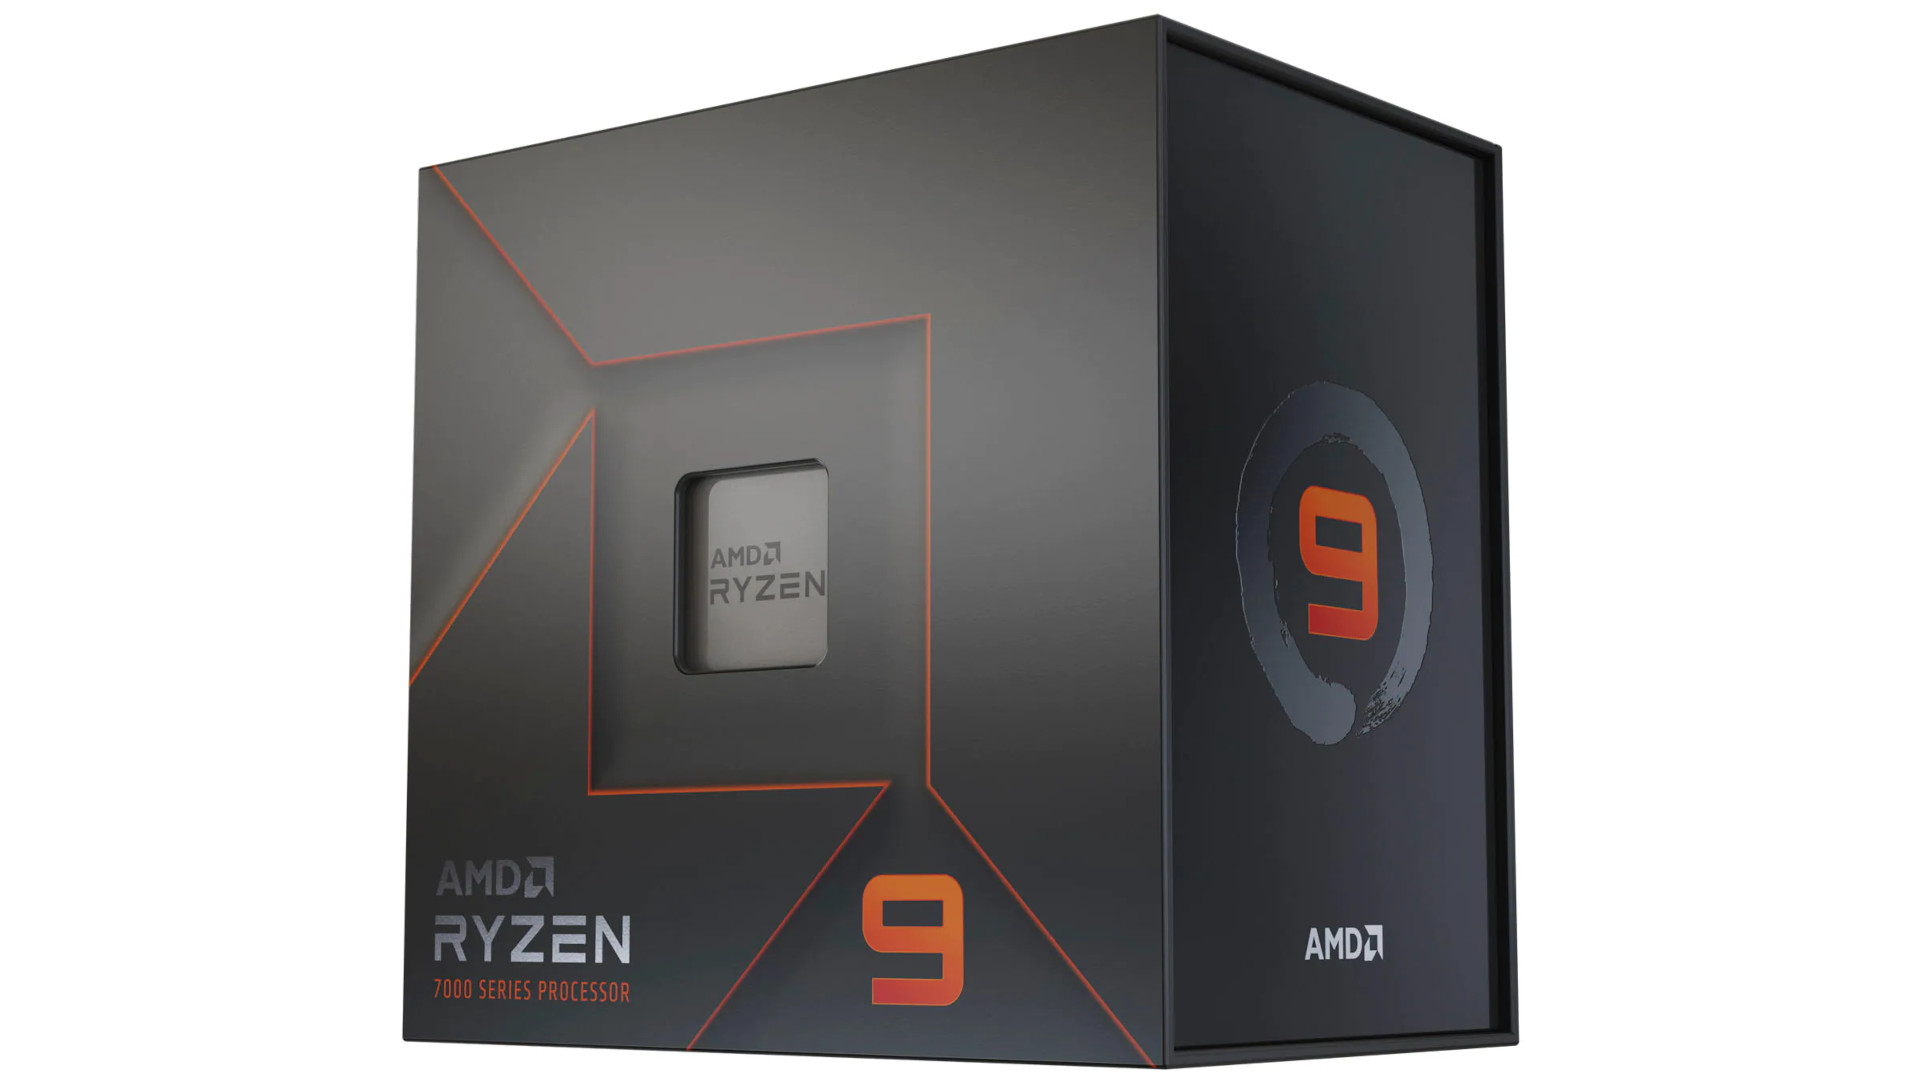 The most powerful AMD gaming CPU is the AMD Ryzen 9 7950X